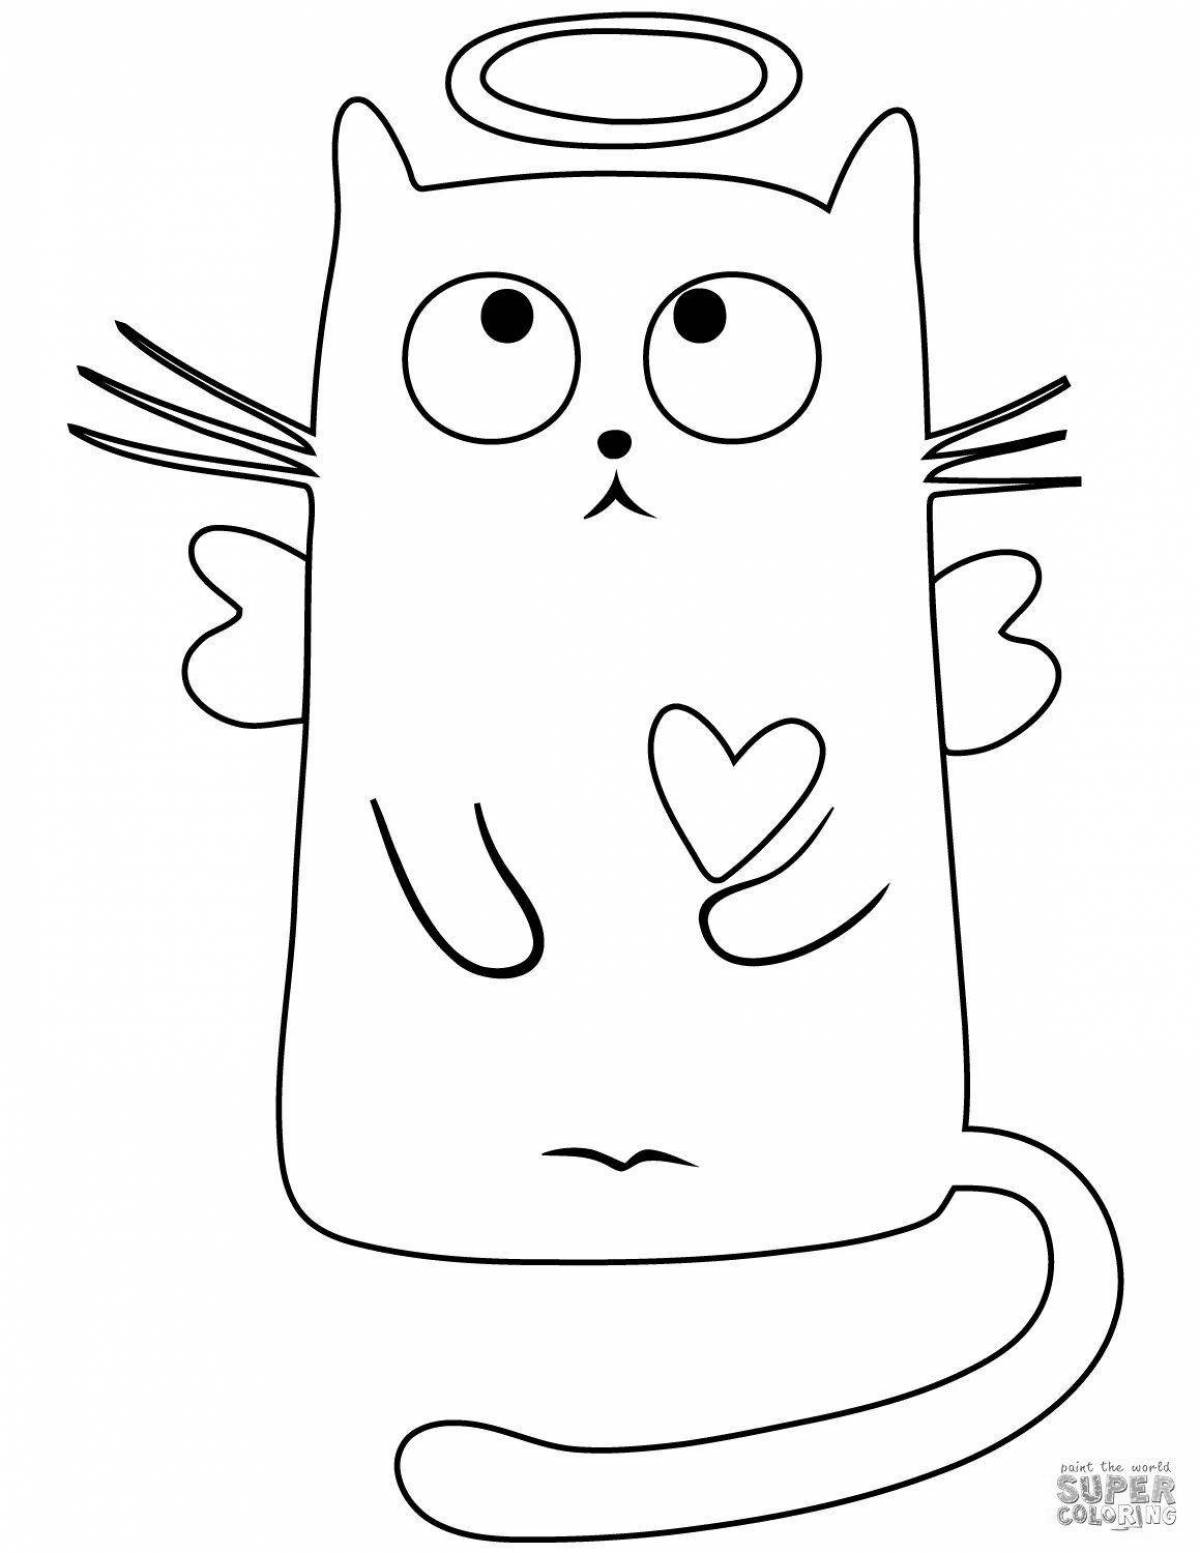 Square cat coloring page